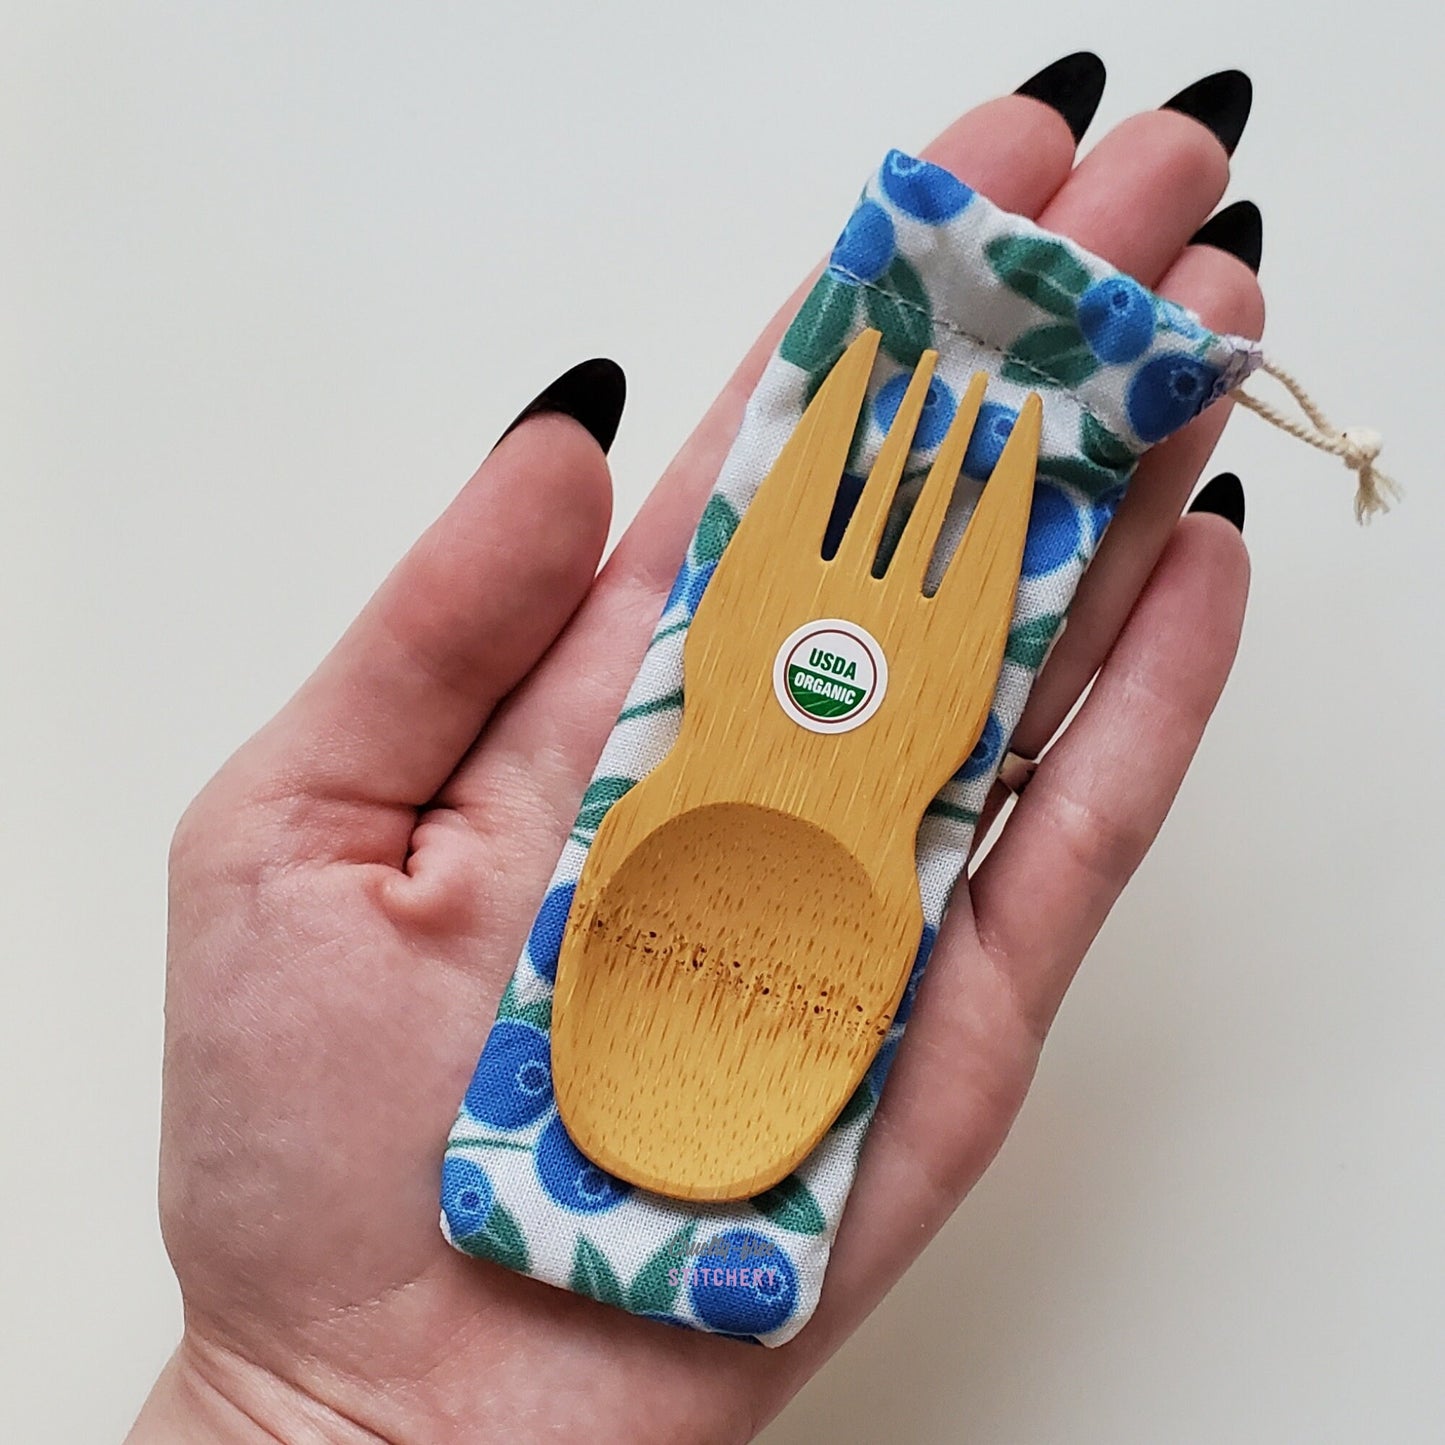 Reusable bamboo spork with pouch. Blueberry print fabric pouch with bamboo spork on top, laid on a hand for size reference. The spork is slightly longer than the fingers.